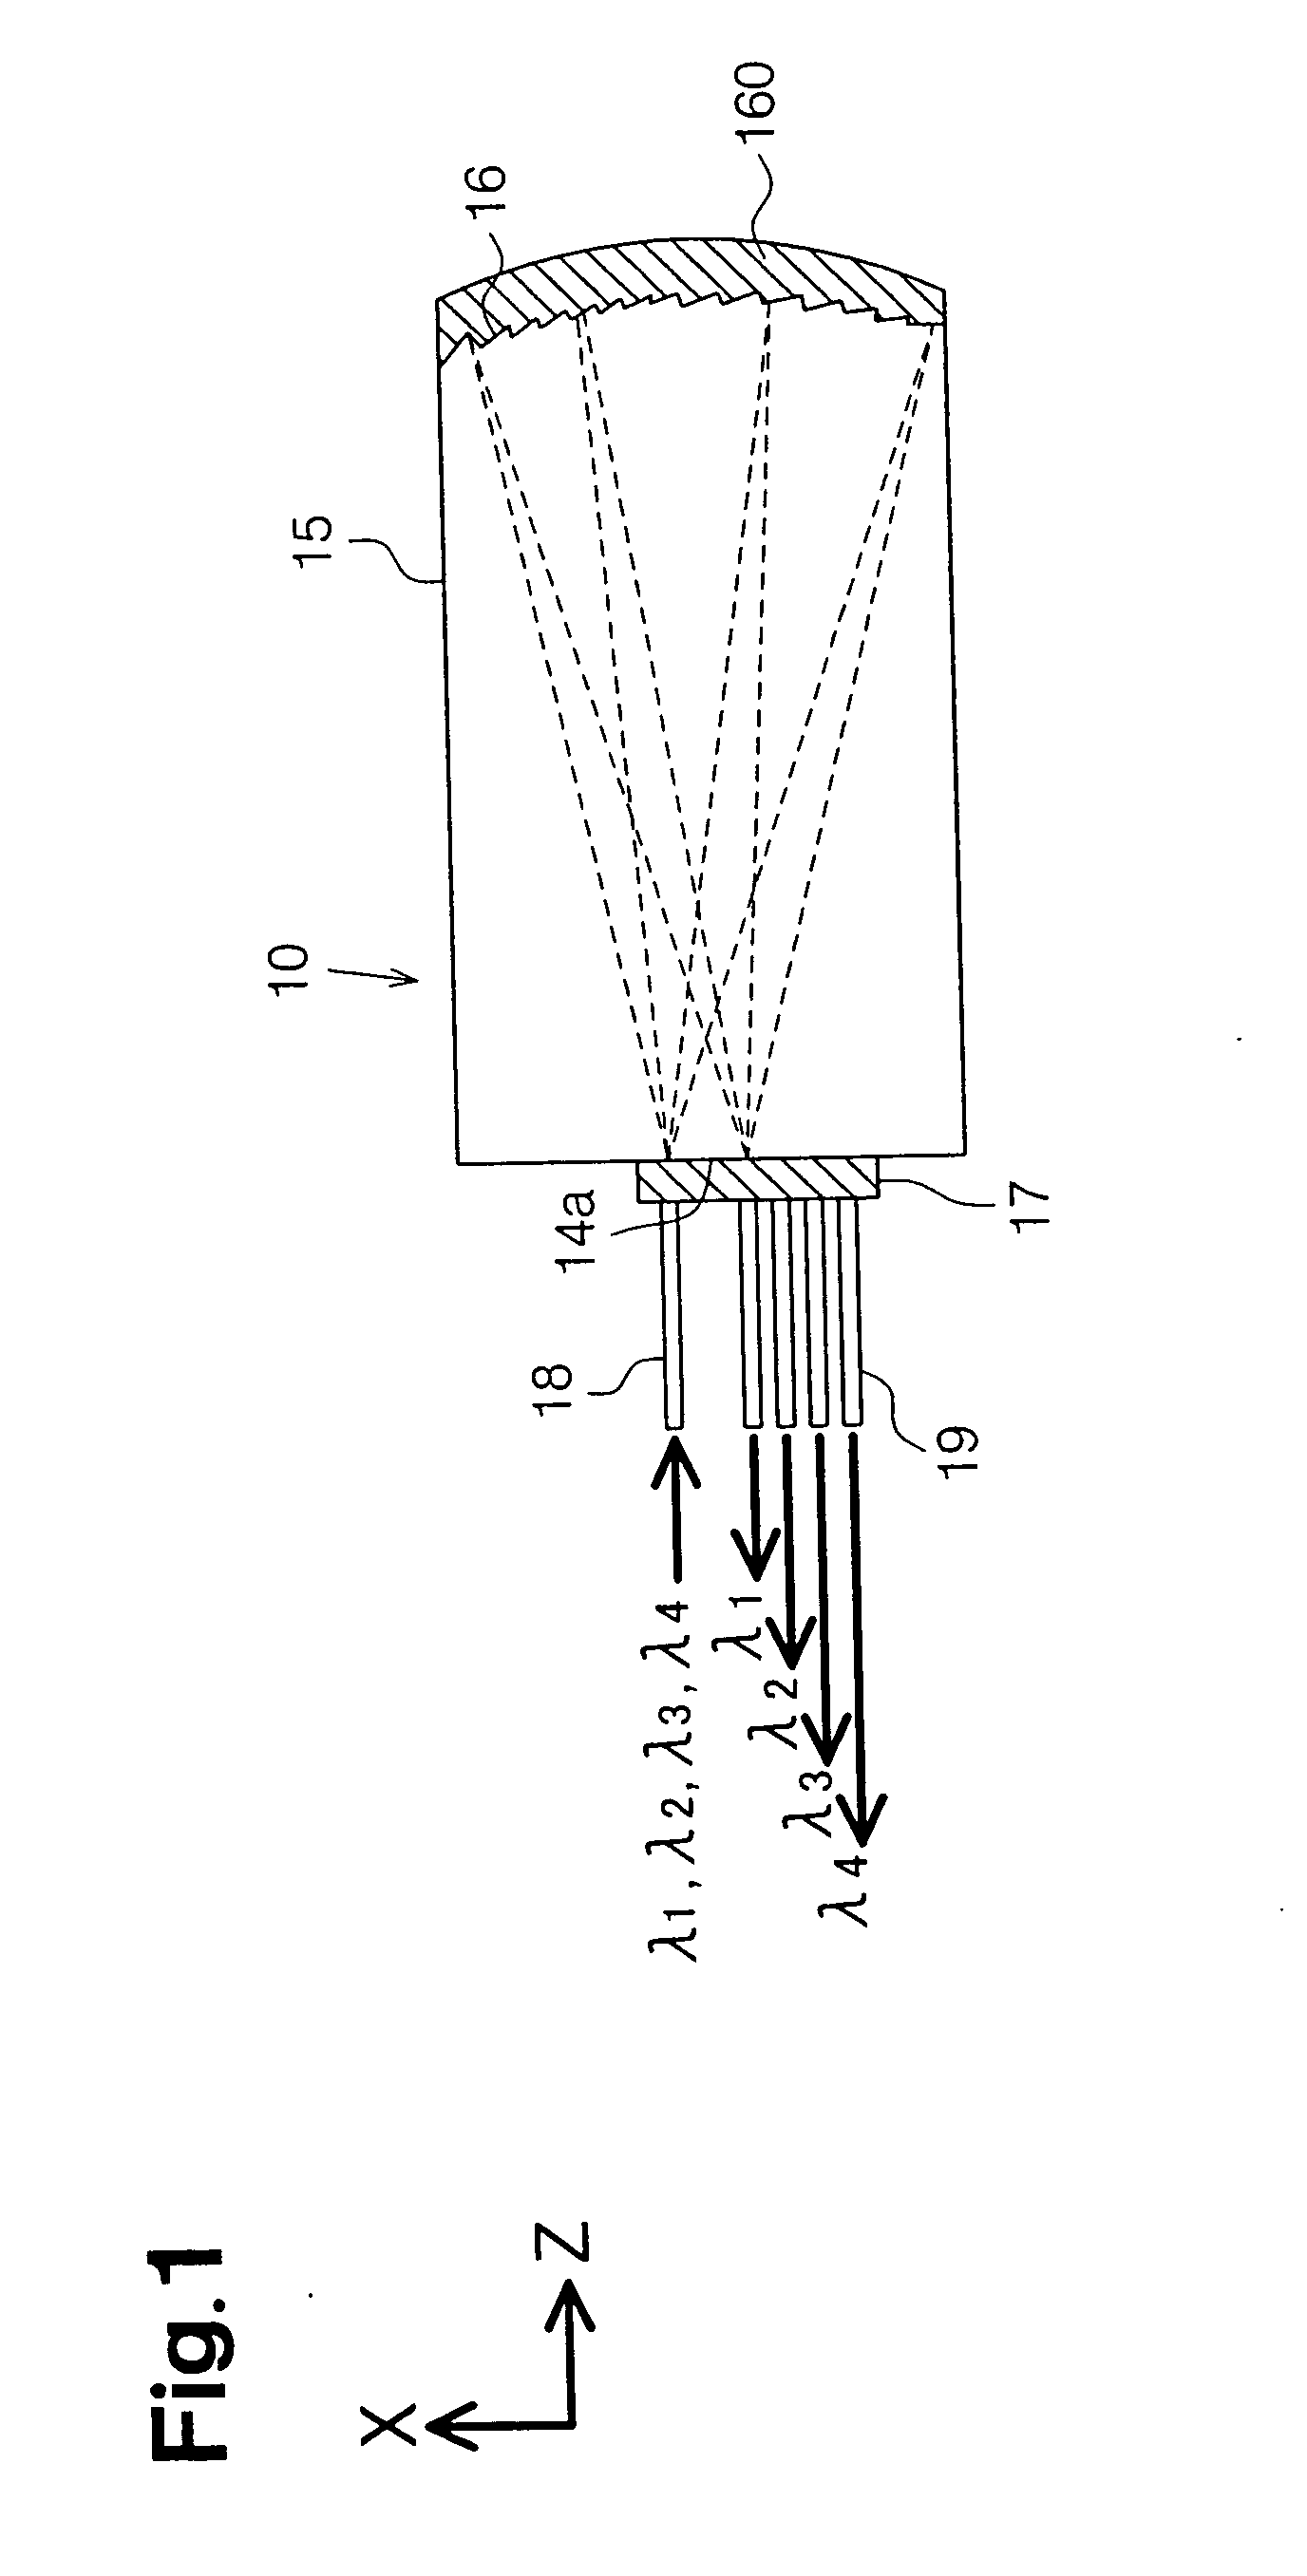 Diffraction device using photonic crystal